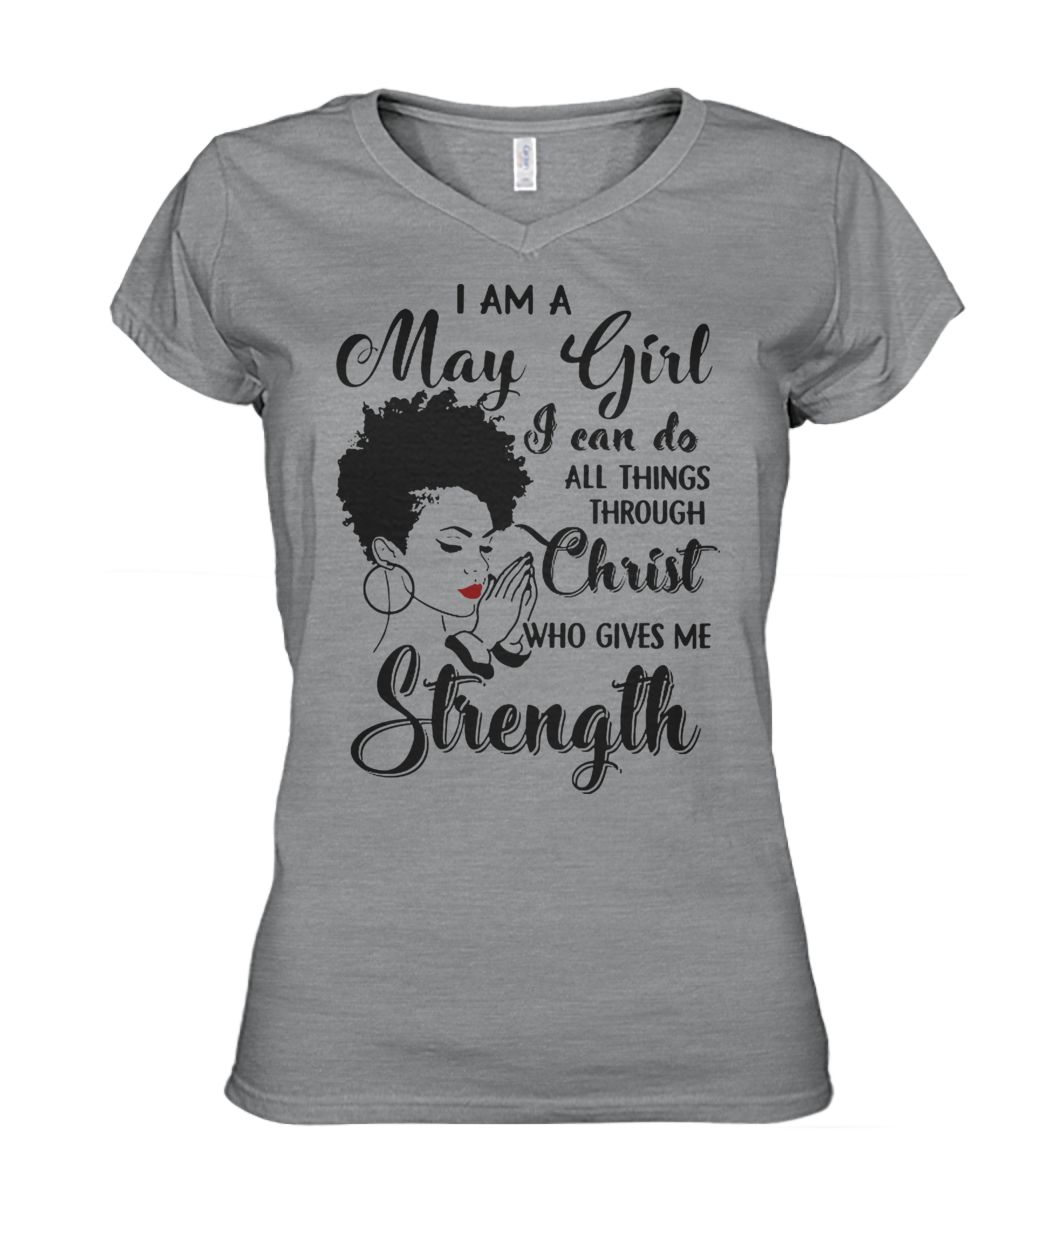 I am a may girl I can do all things through christ who gives me strength women's v-neck